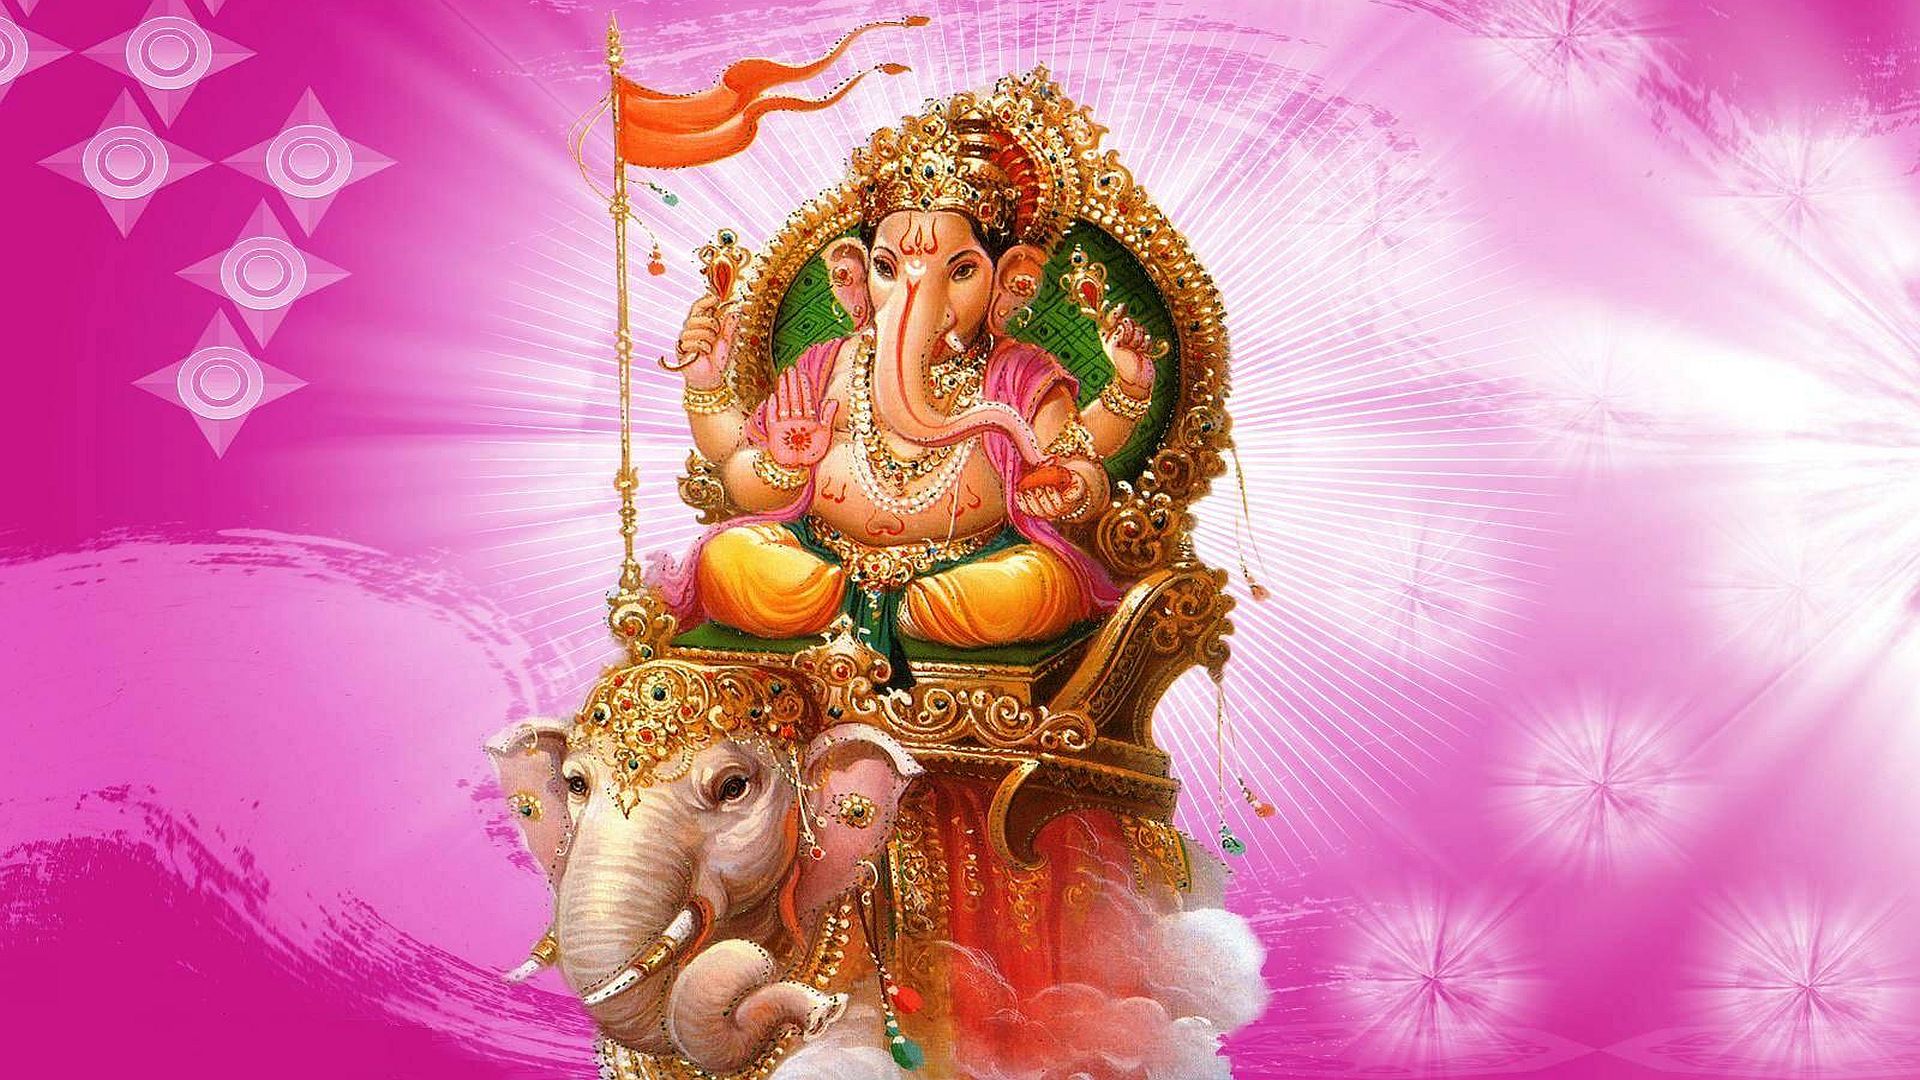 Beautiful Pictures Of Lord Ganesha